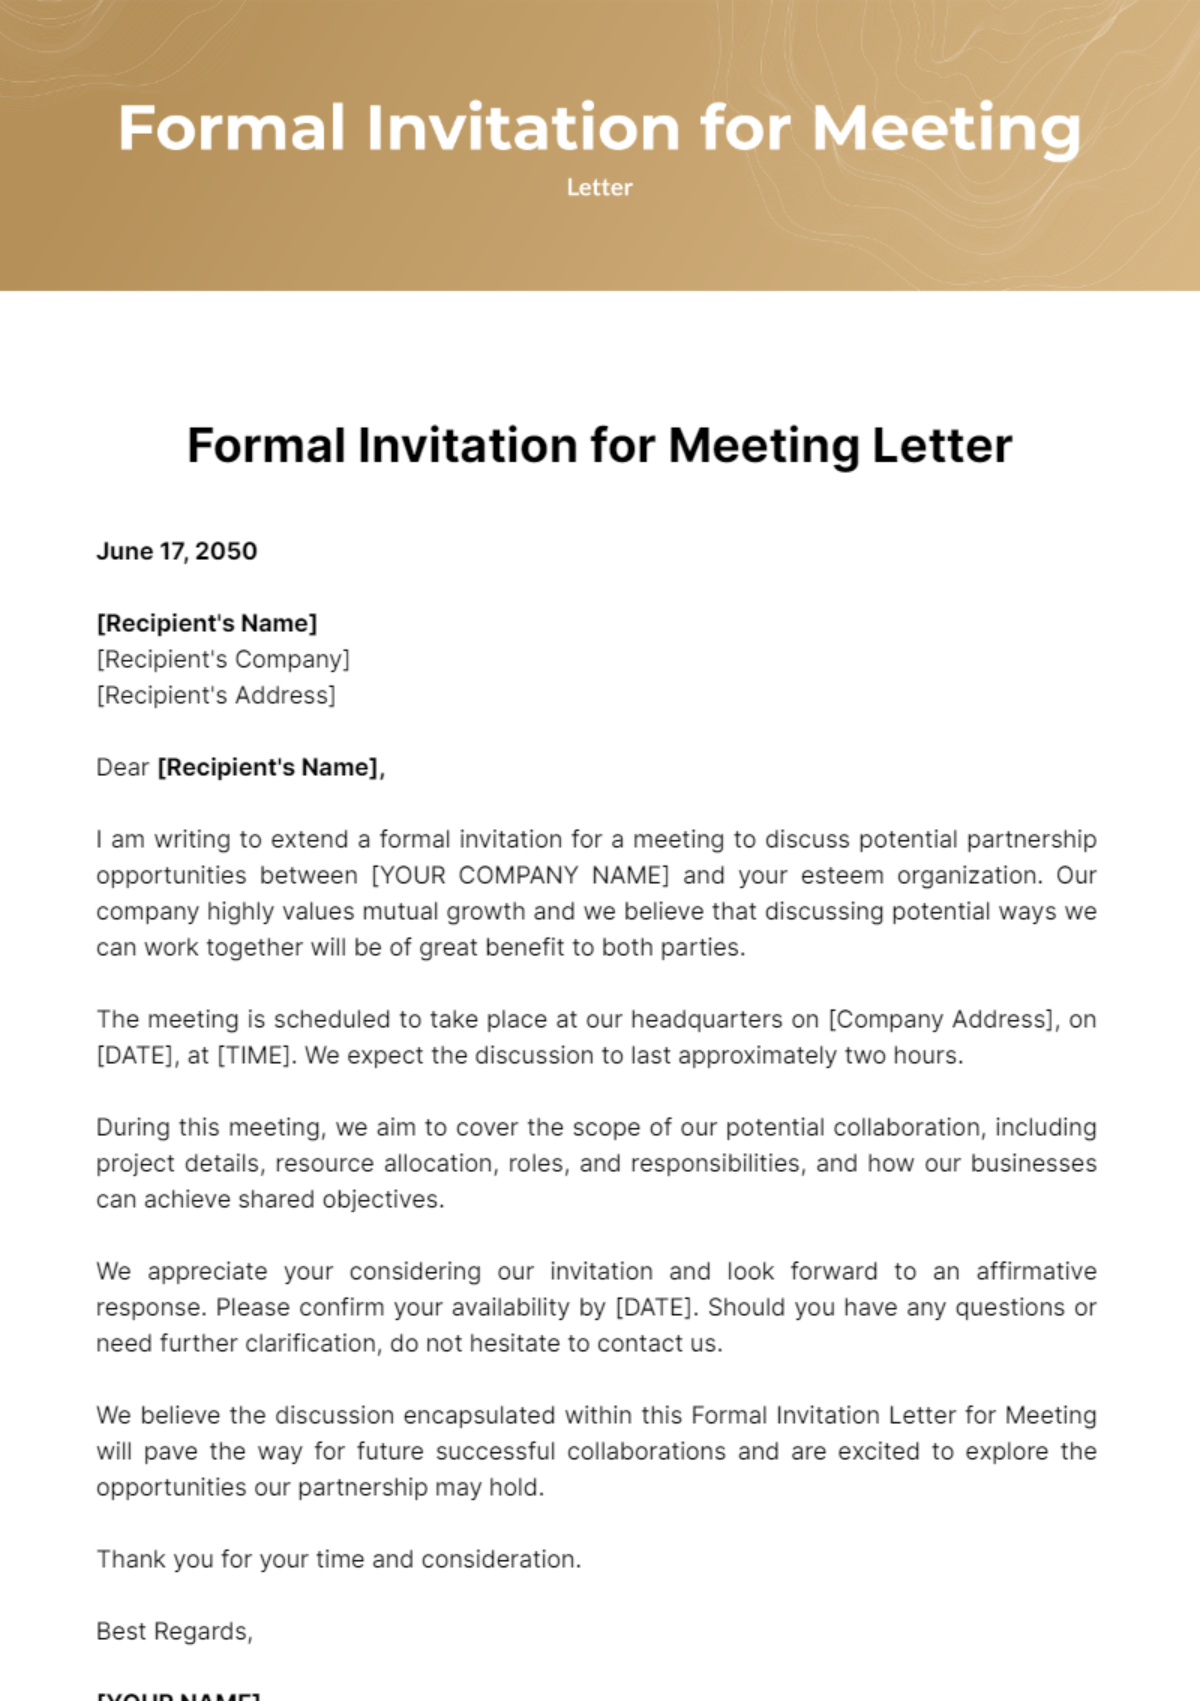 Free Formal Invitation Letter for Meeting Template